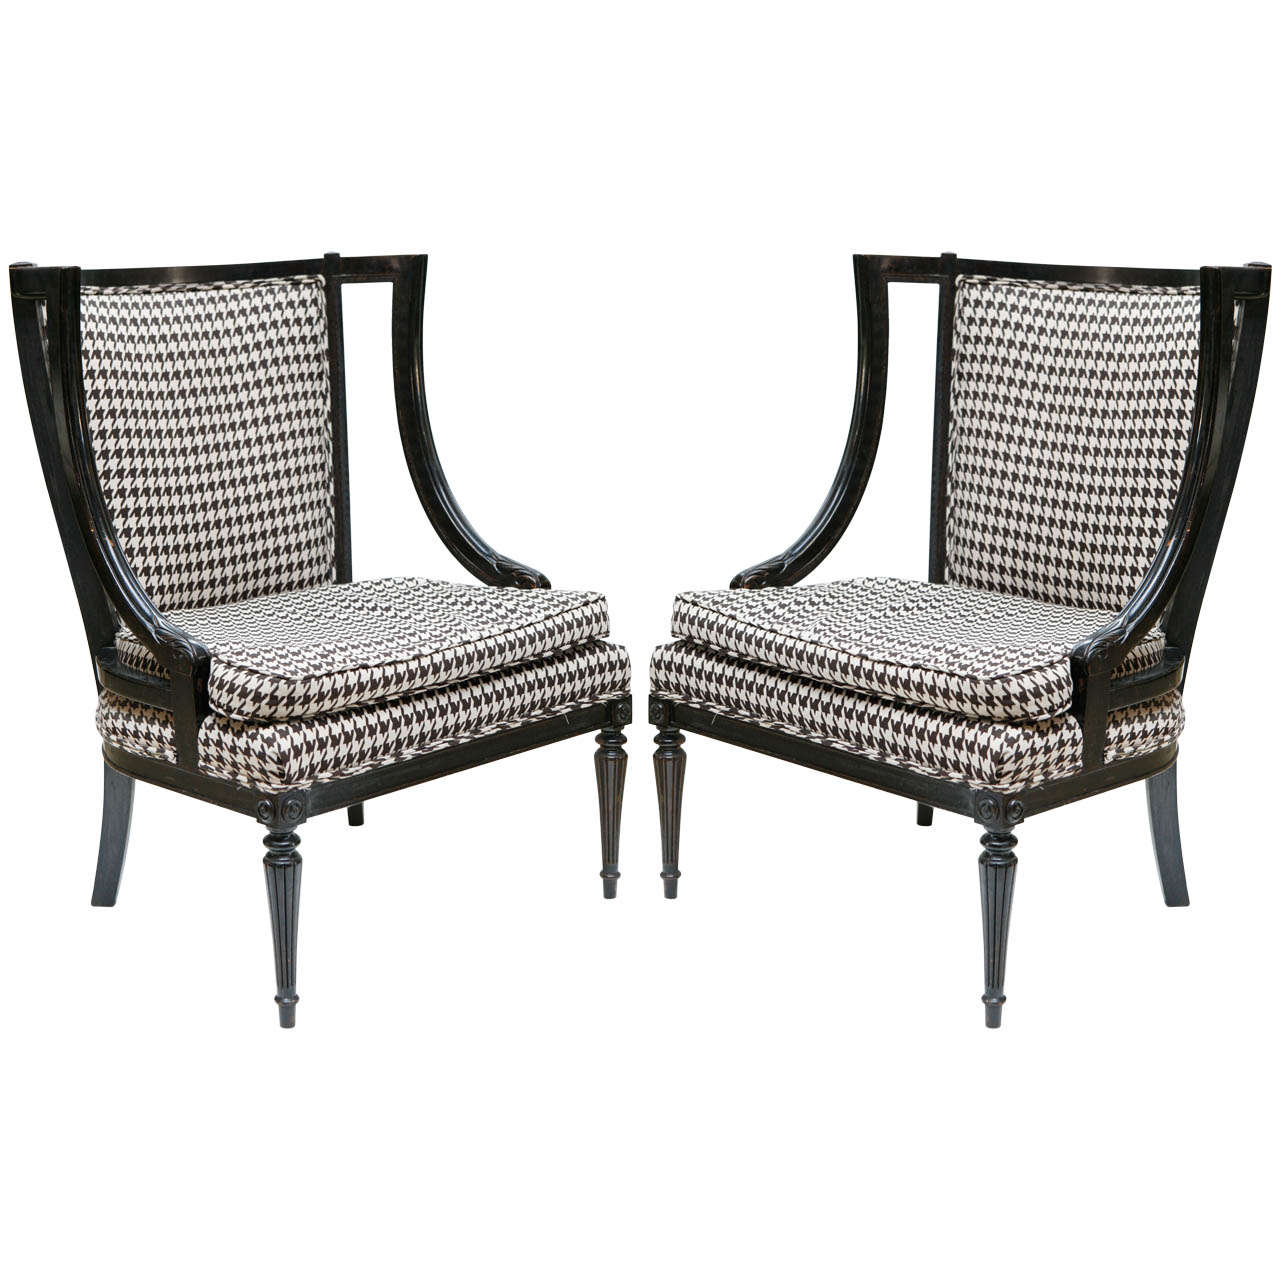 Pair of Houndstooth Chairs